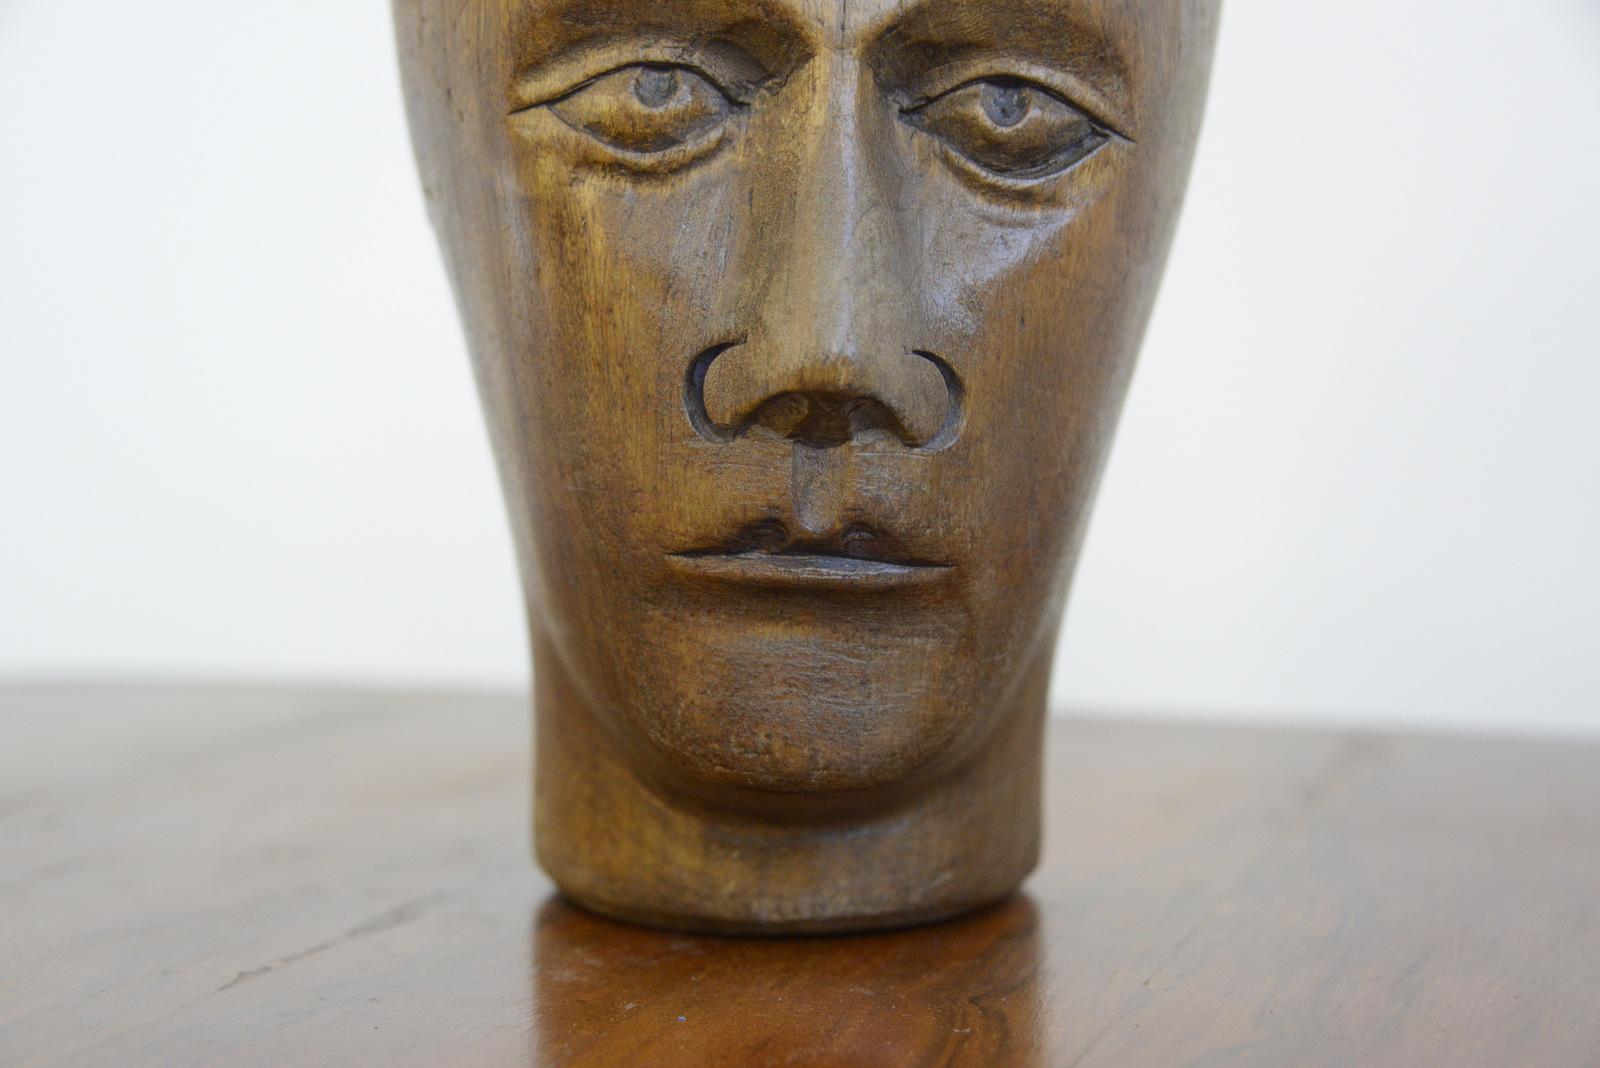 German carved wooden Milliners head, circa 1910

- Hand carved from sycamore
- Used in the displaying and making of hats
- German ~ 1910
- 25cm tall x 15cm wide x 18cm deep

Condition report

Signs of its previous in the form of pin